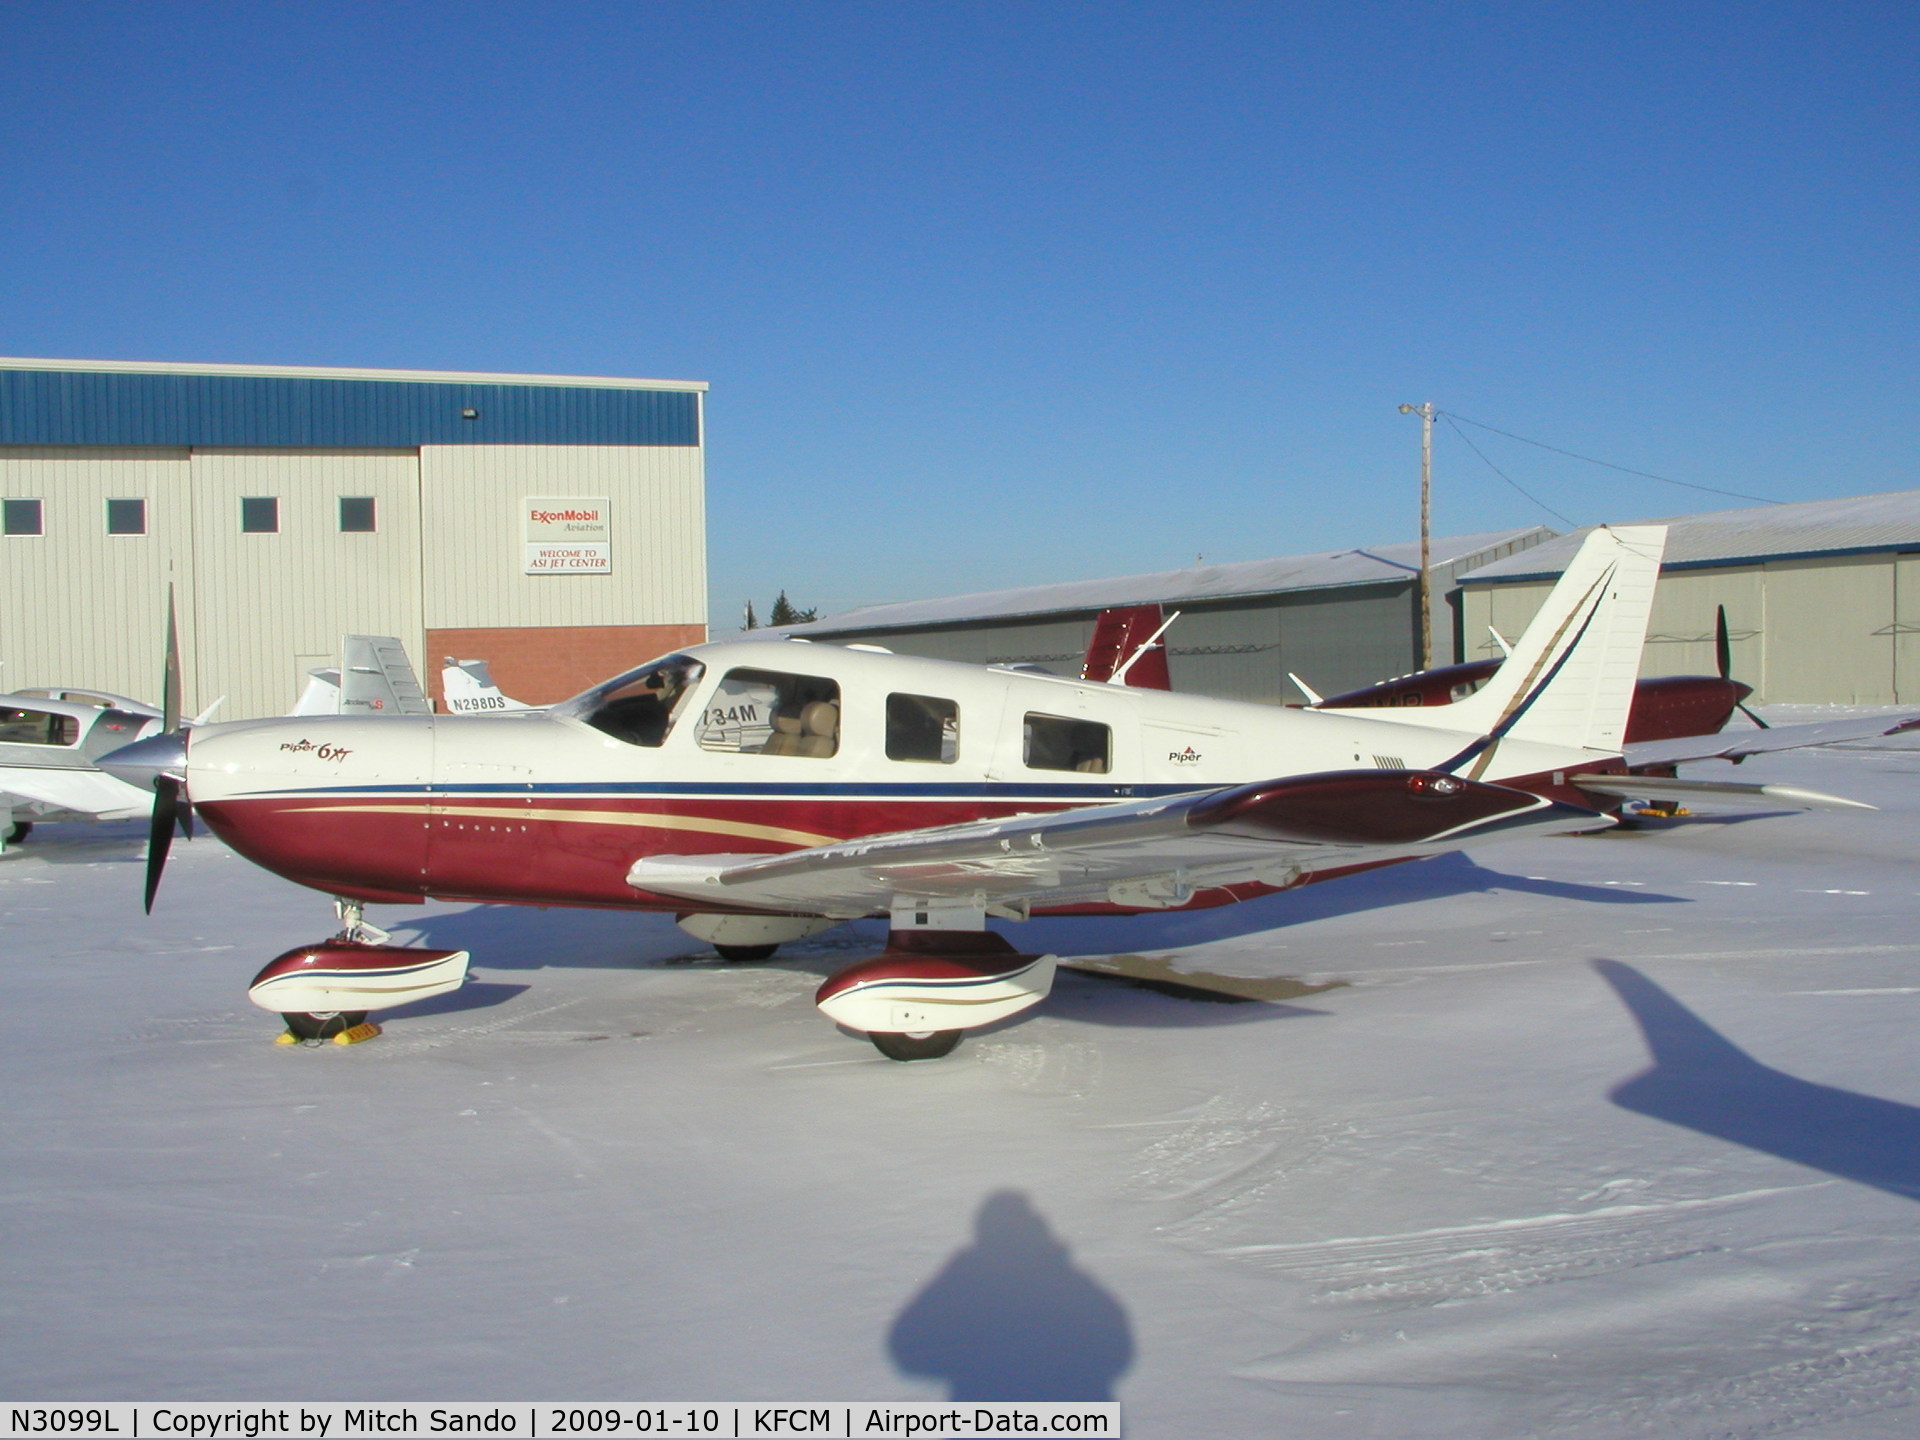 N3099L, 2005 Piper PA-32-301XTC Saratoga C/N 3255032, Parked on the ramp at ASI.